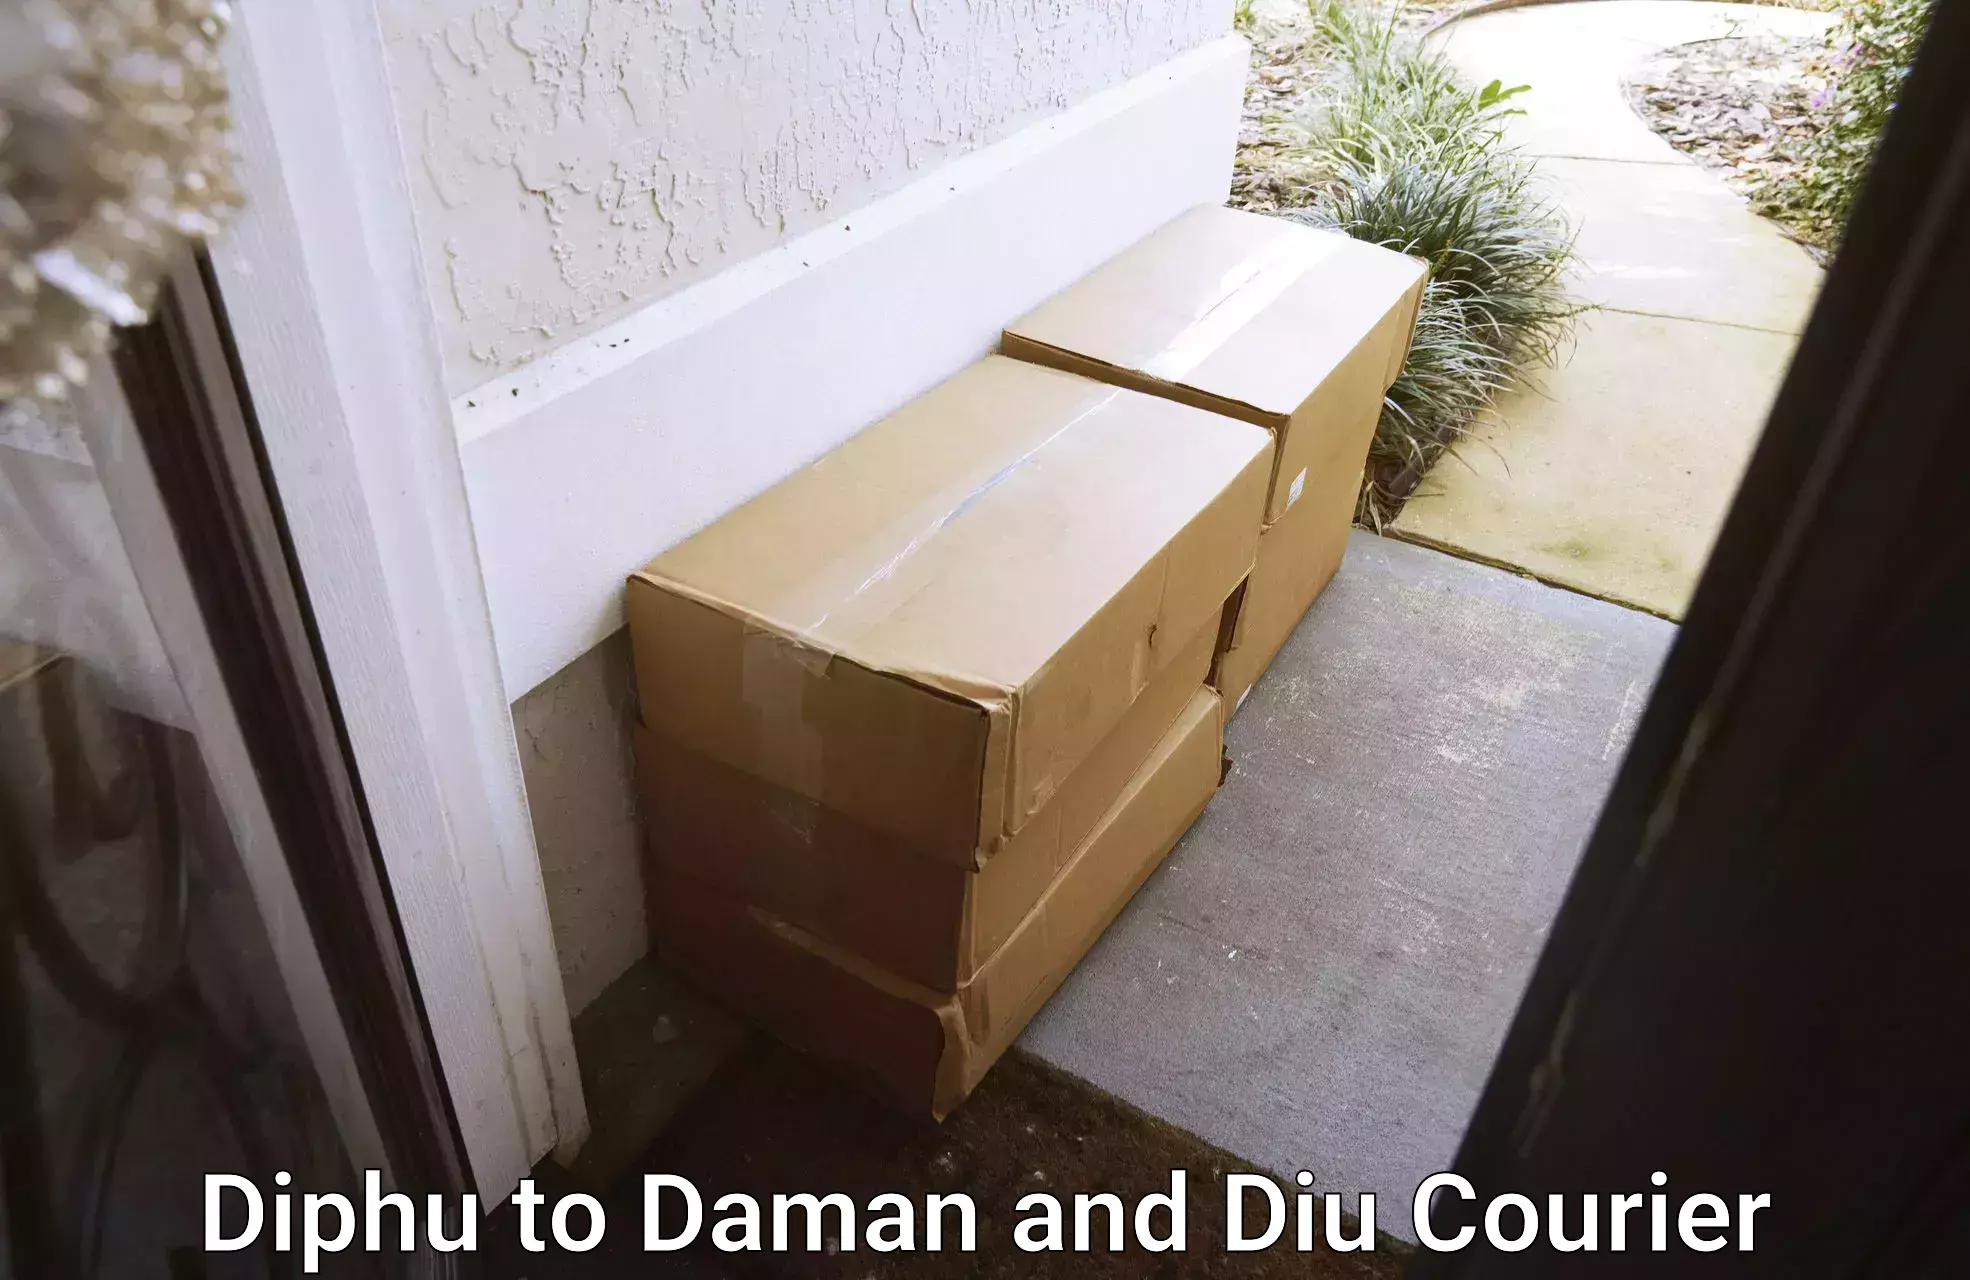 Speedy delivery service Diphu to Diu